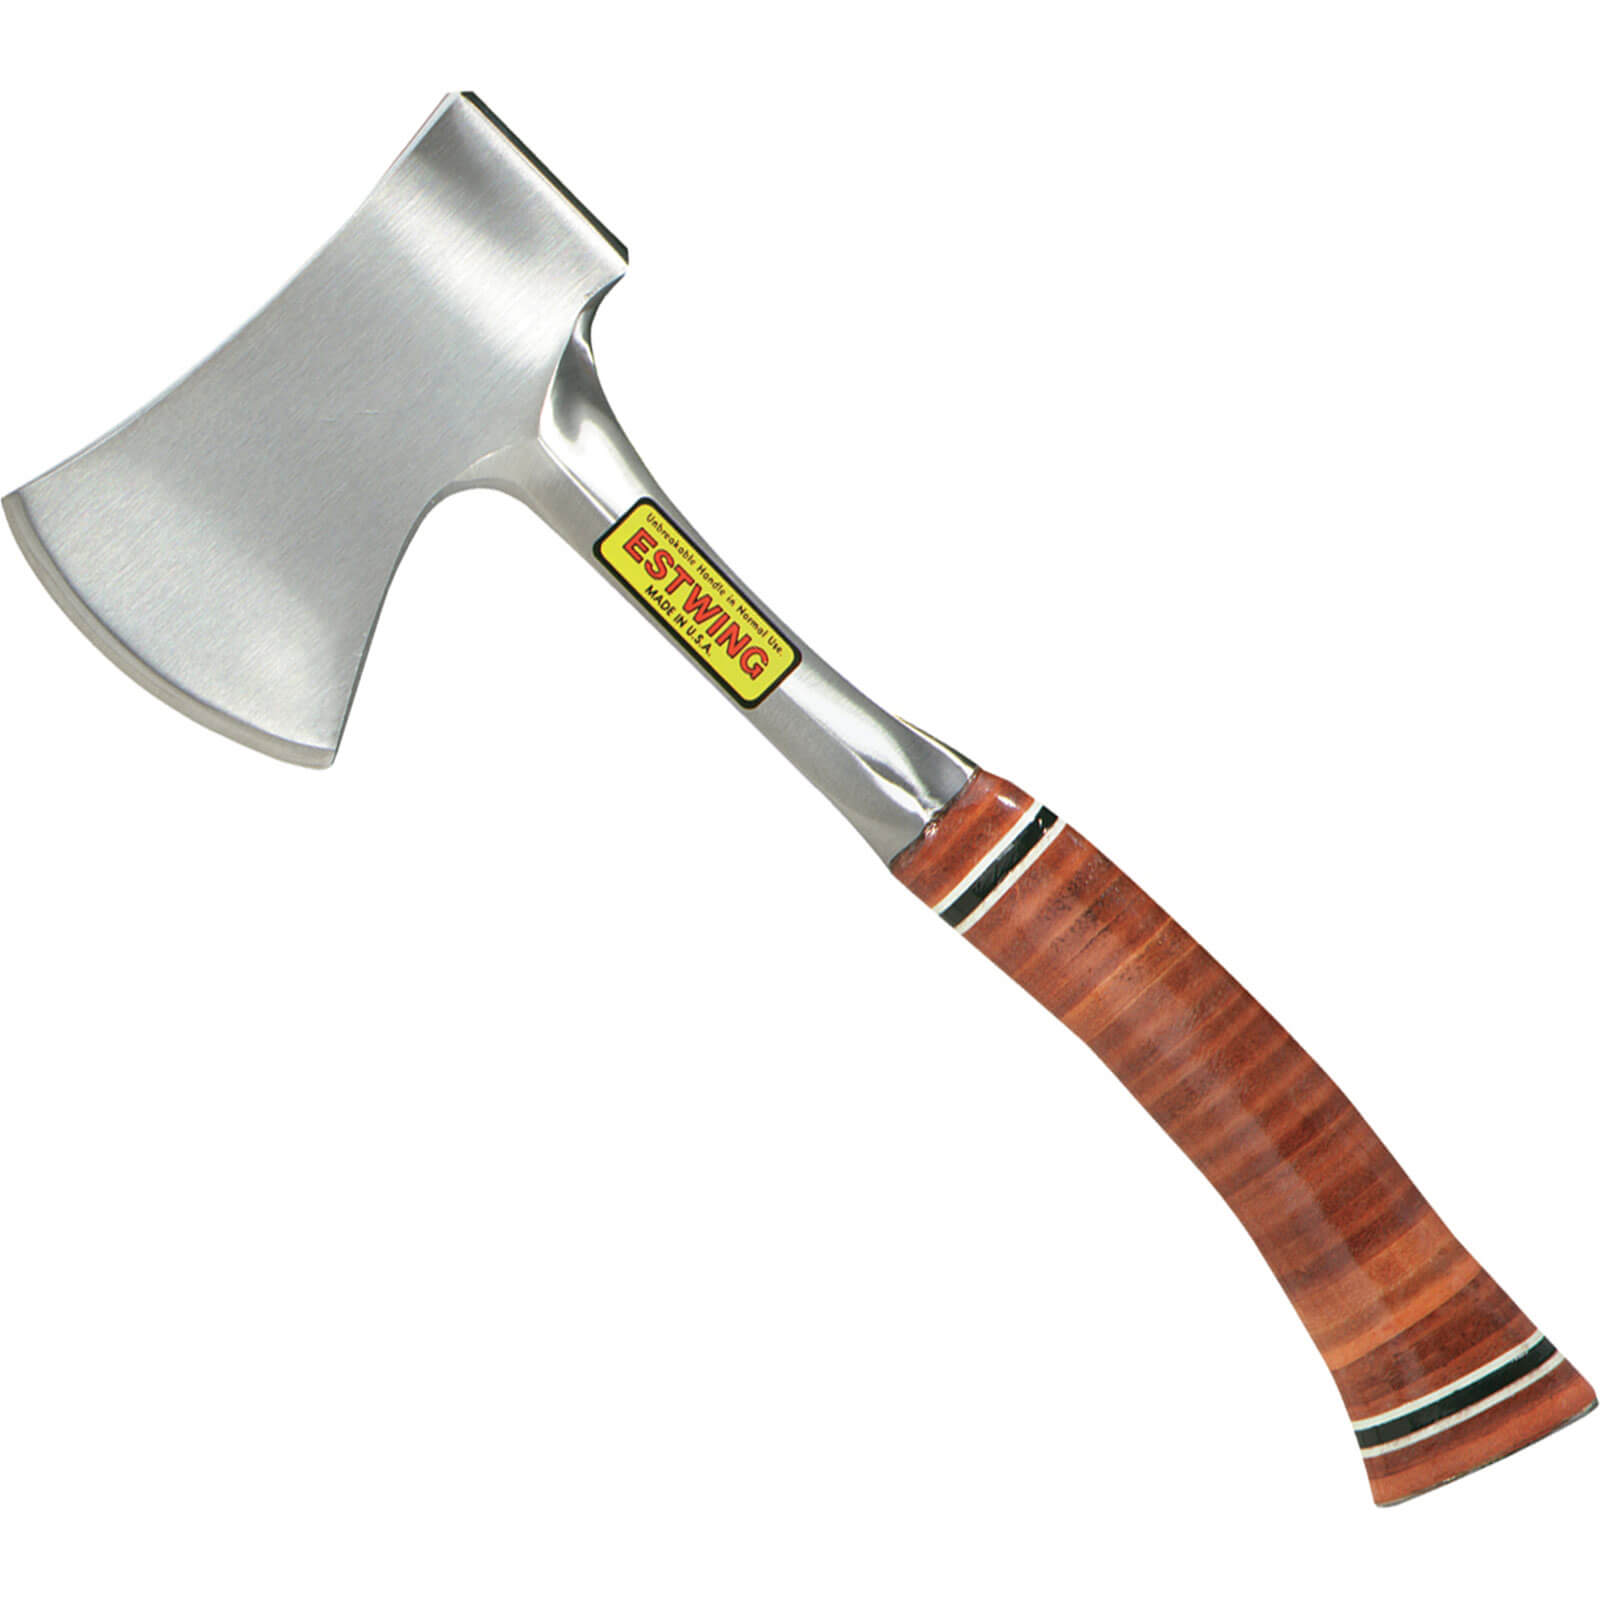 Estwing Sportsmans Axe with Leather Grip 305mm